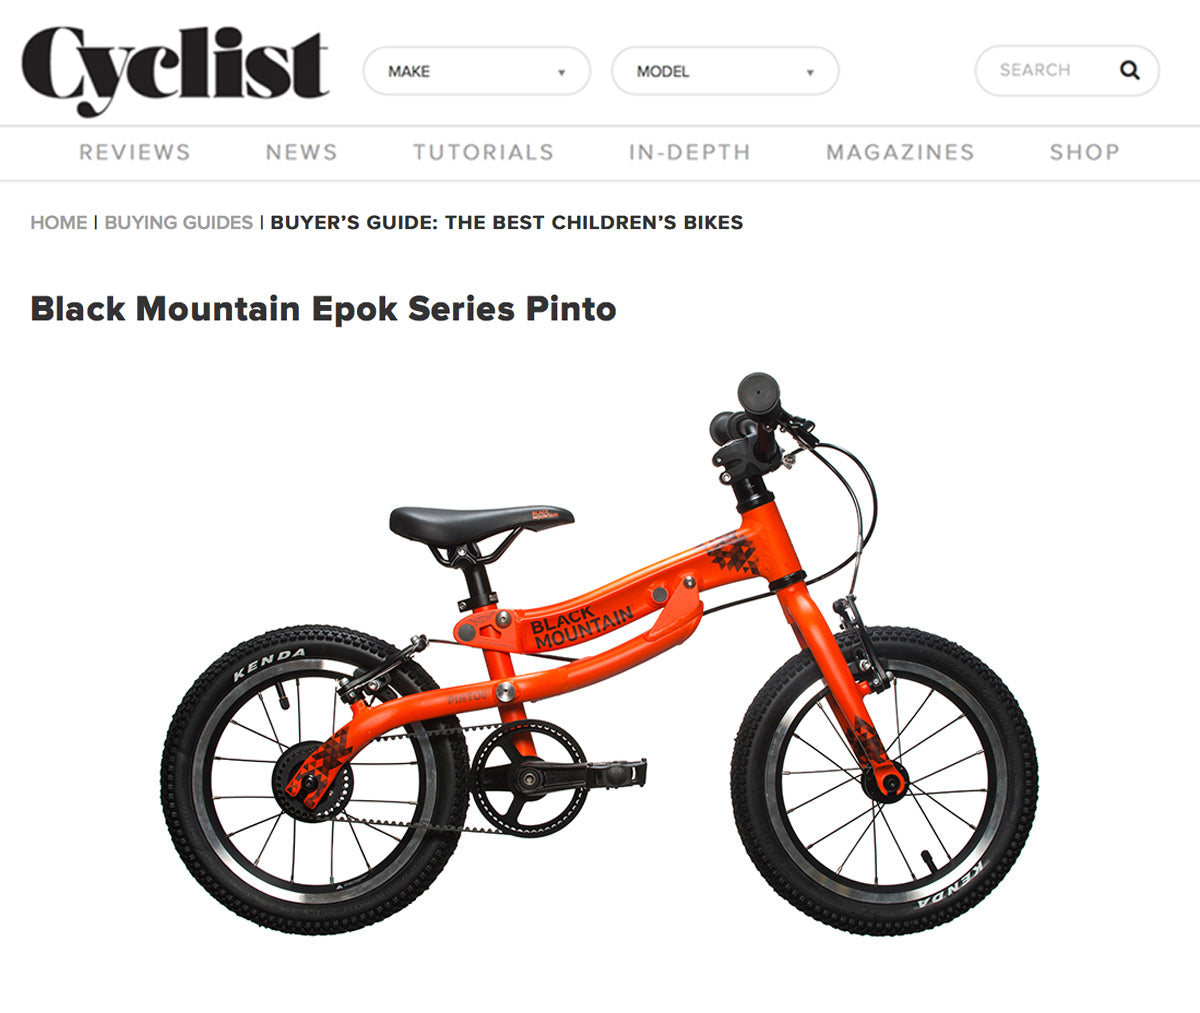 Image of the PINTO bike on Cyclist website